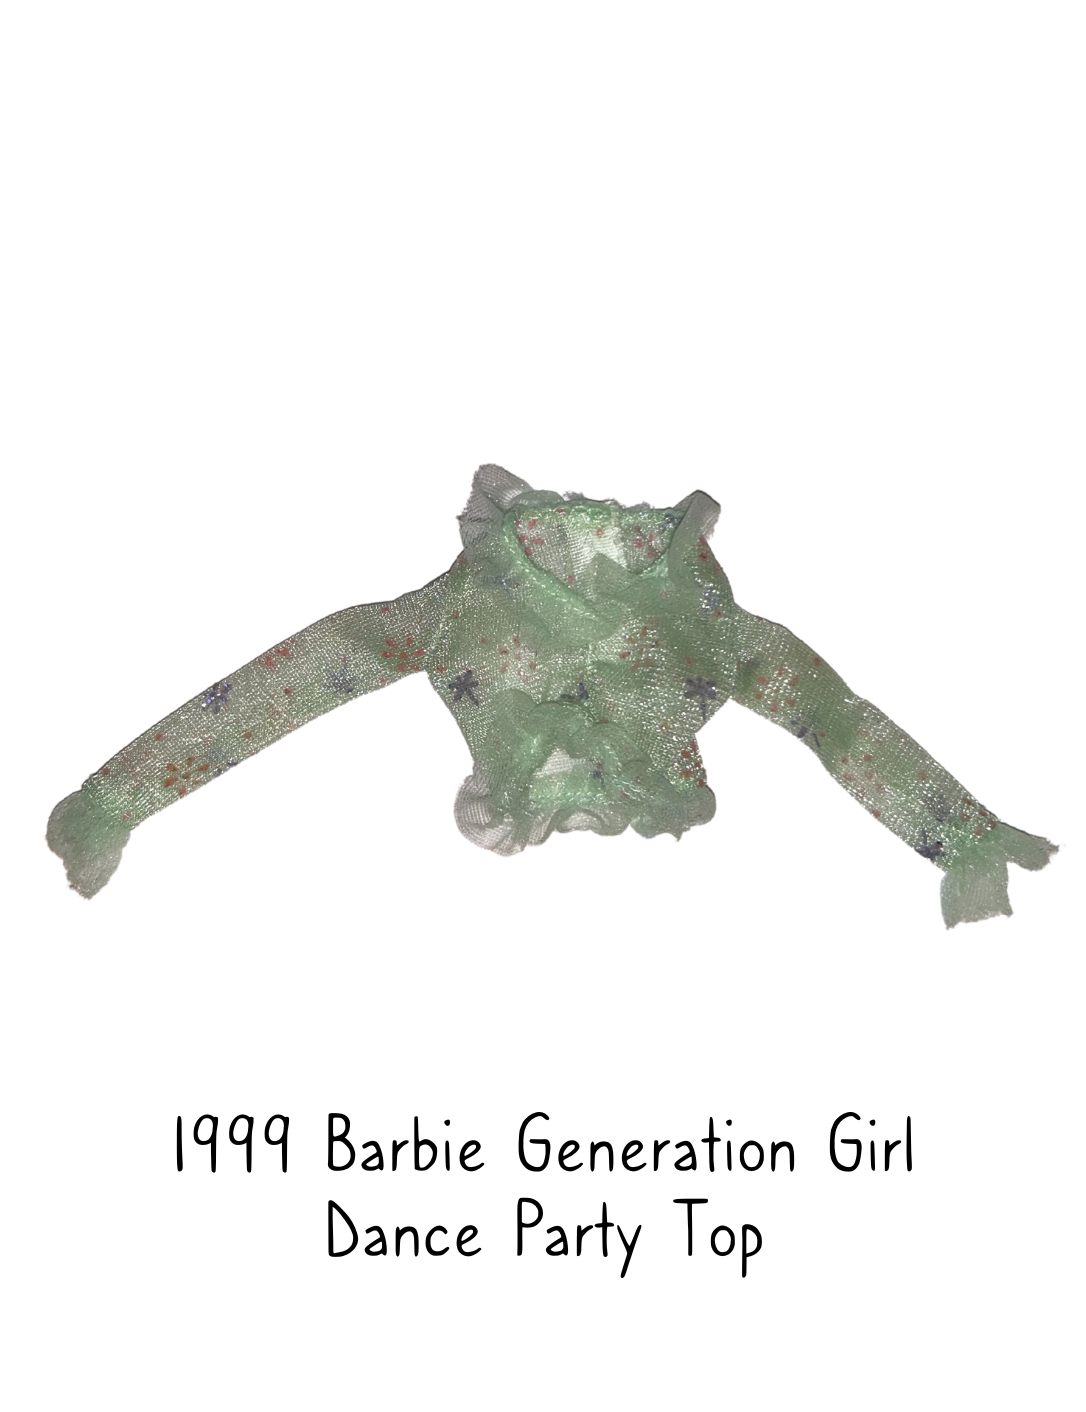 1999 My Generation Barbie Dance Party Top